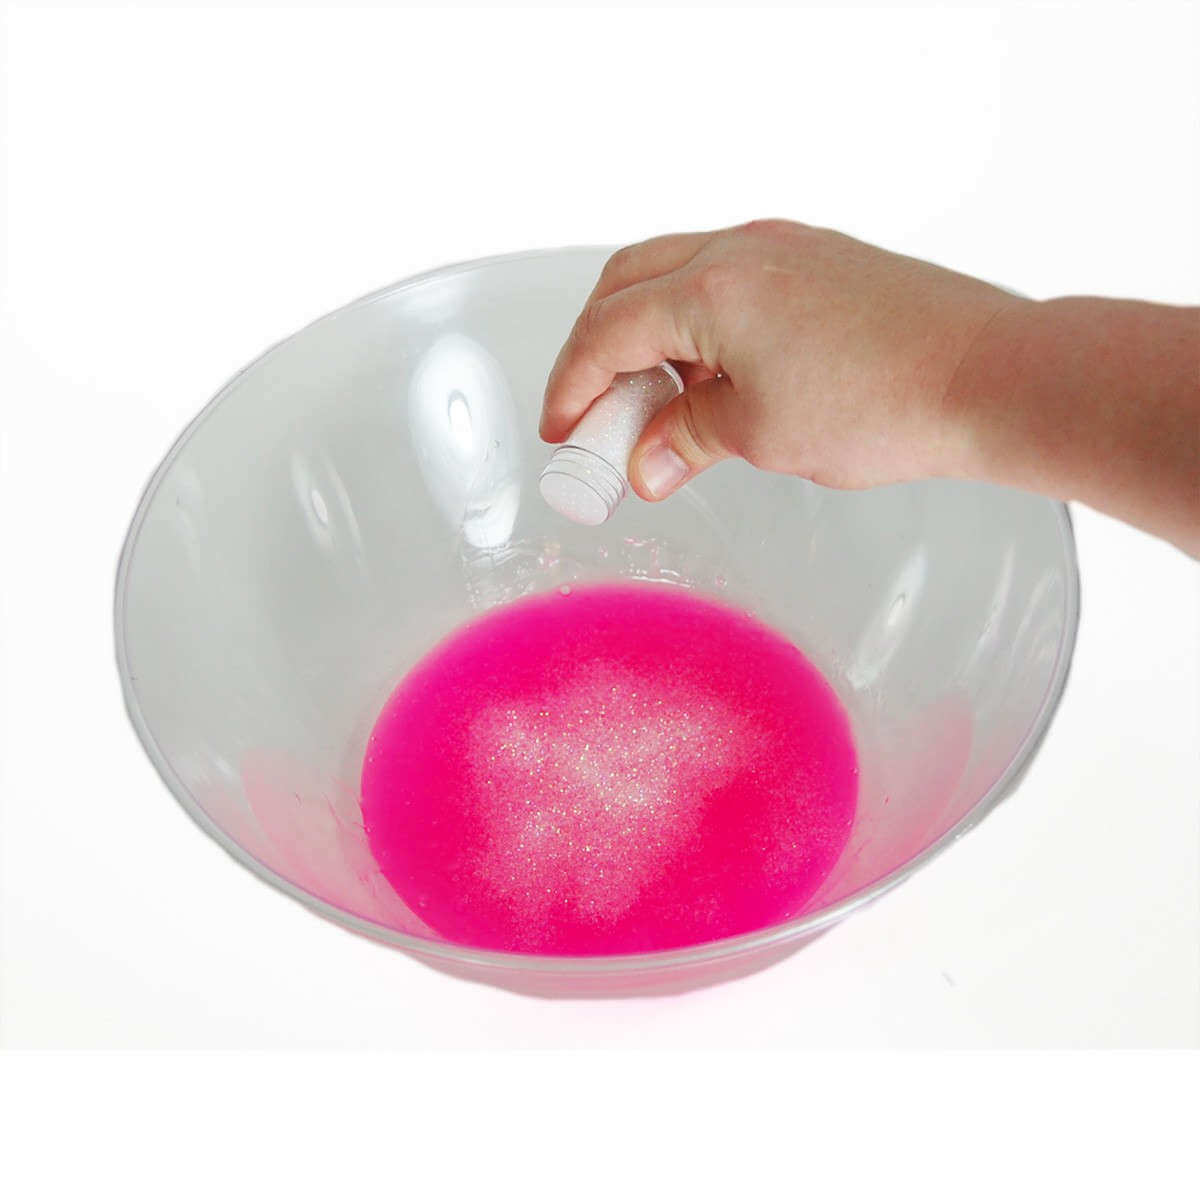 How To Make Scented Slime - Little Bins for Little Hands